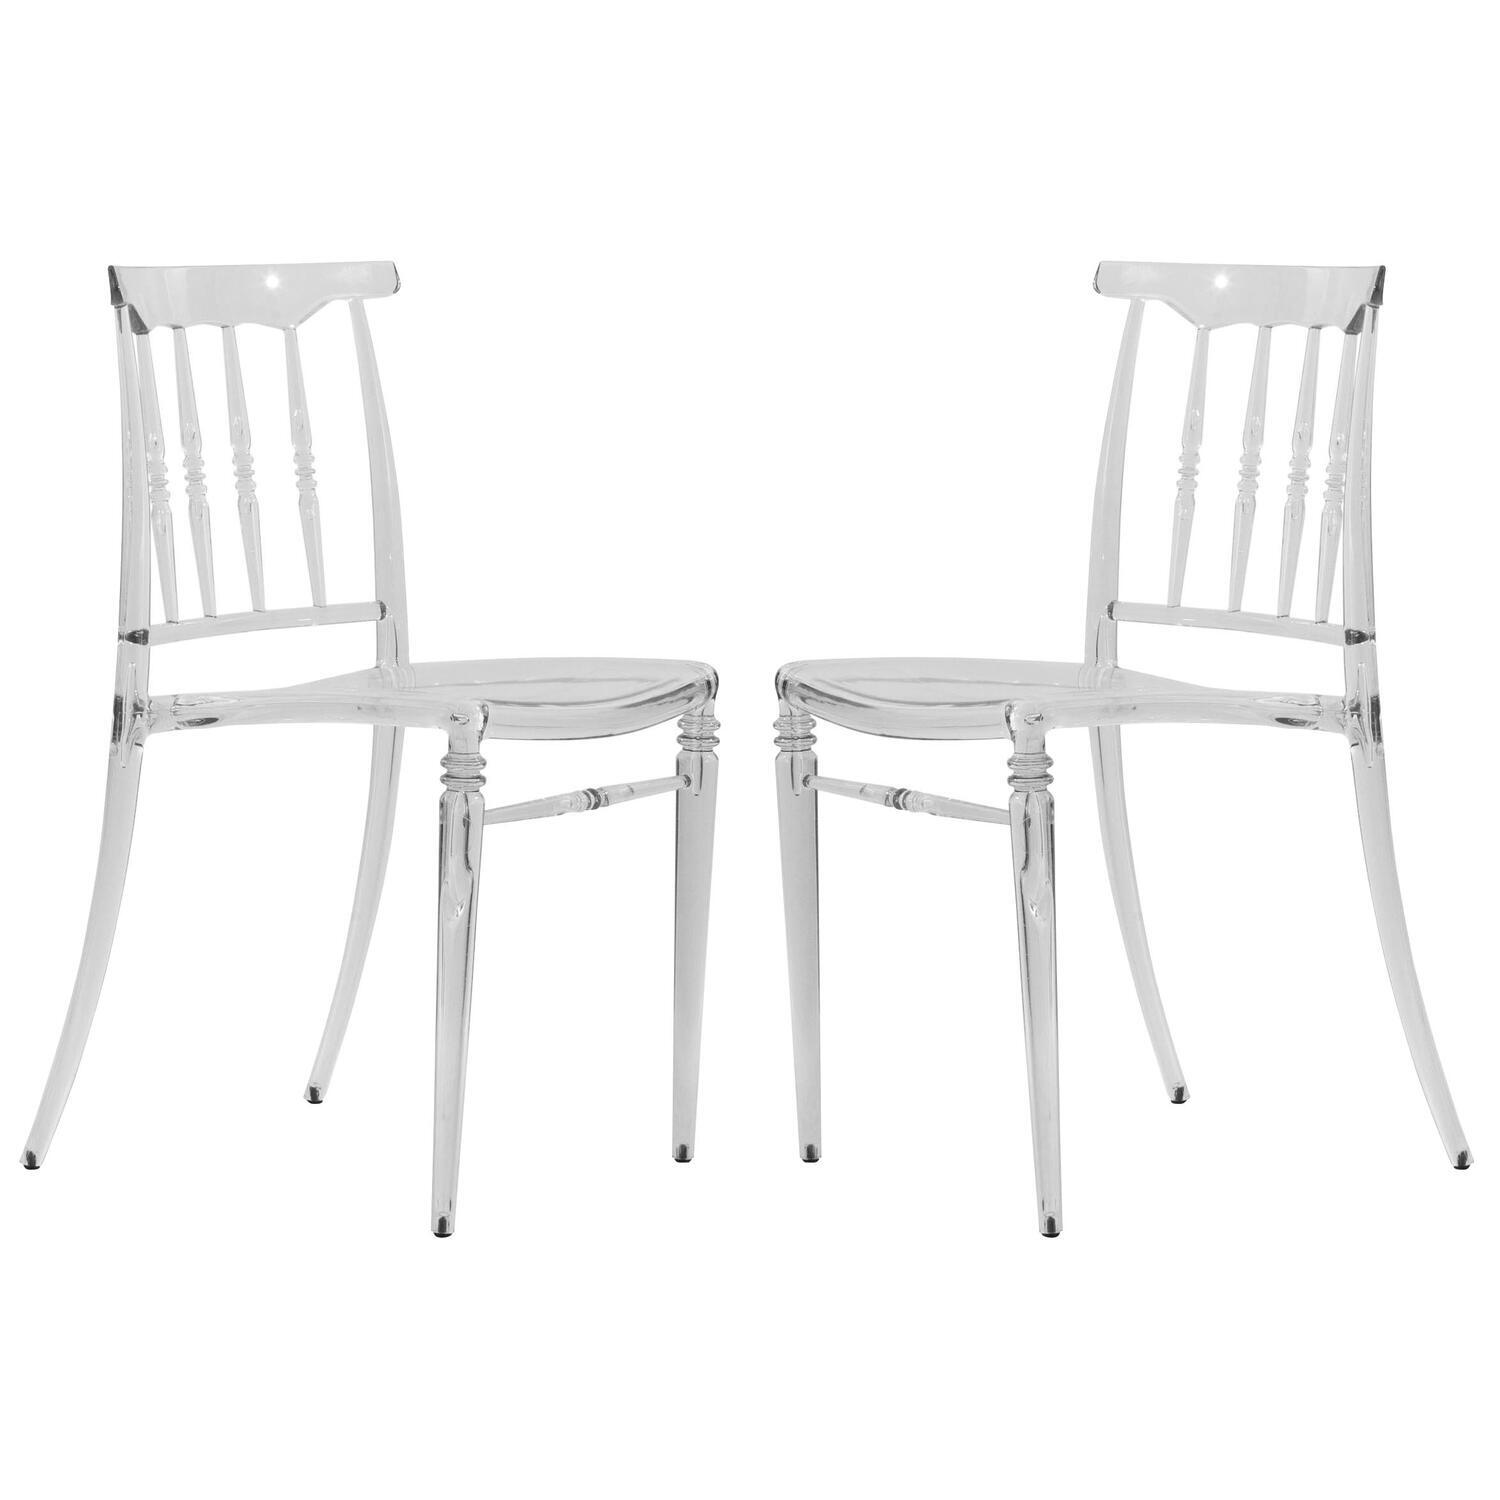 LeisureMod Spindle Transparent Modern Lucite Dining Chair - Set of 2 - image 1 of 7